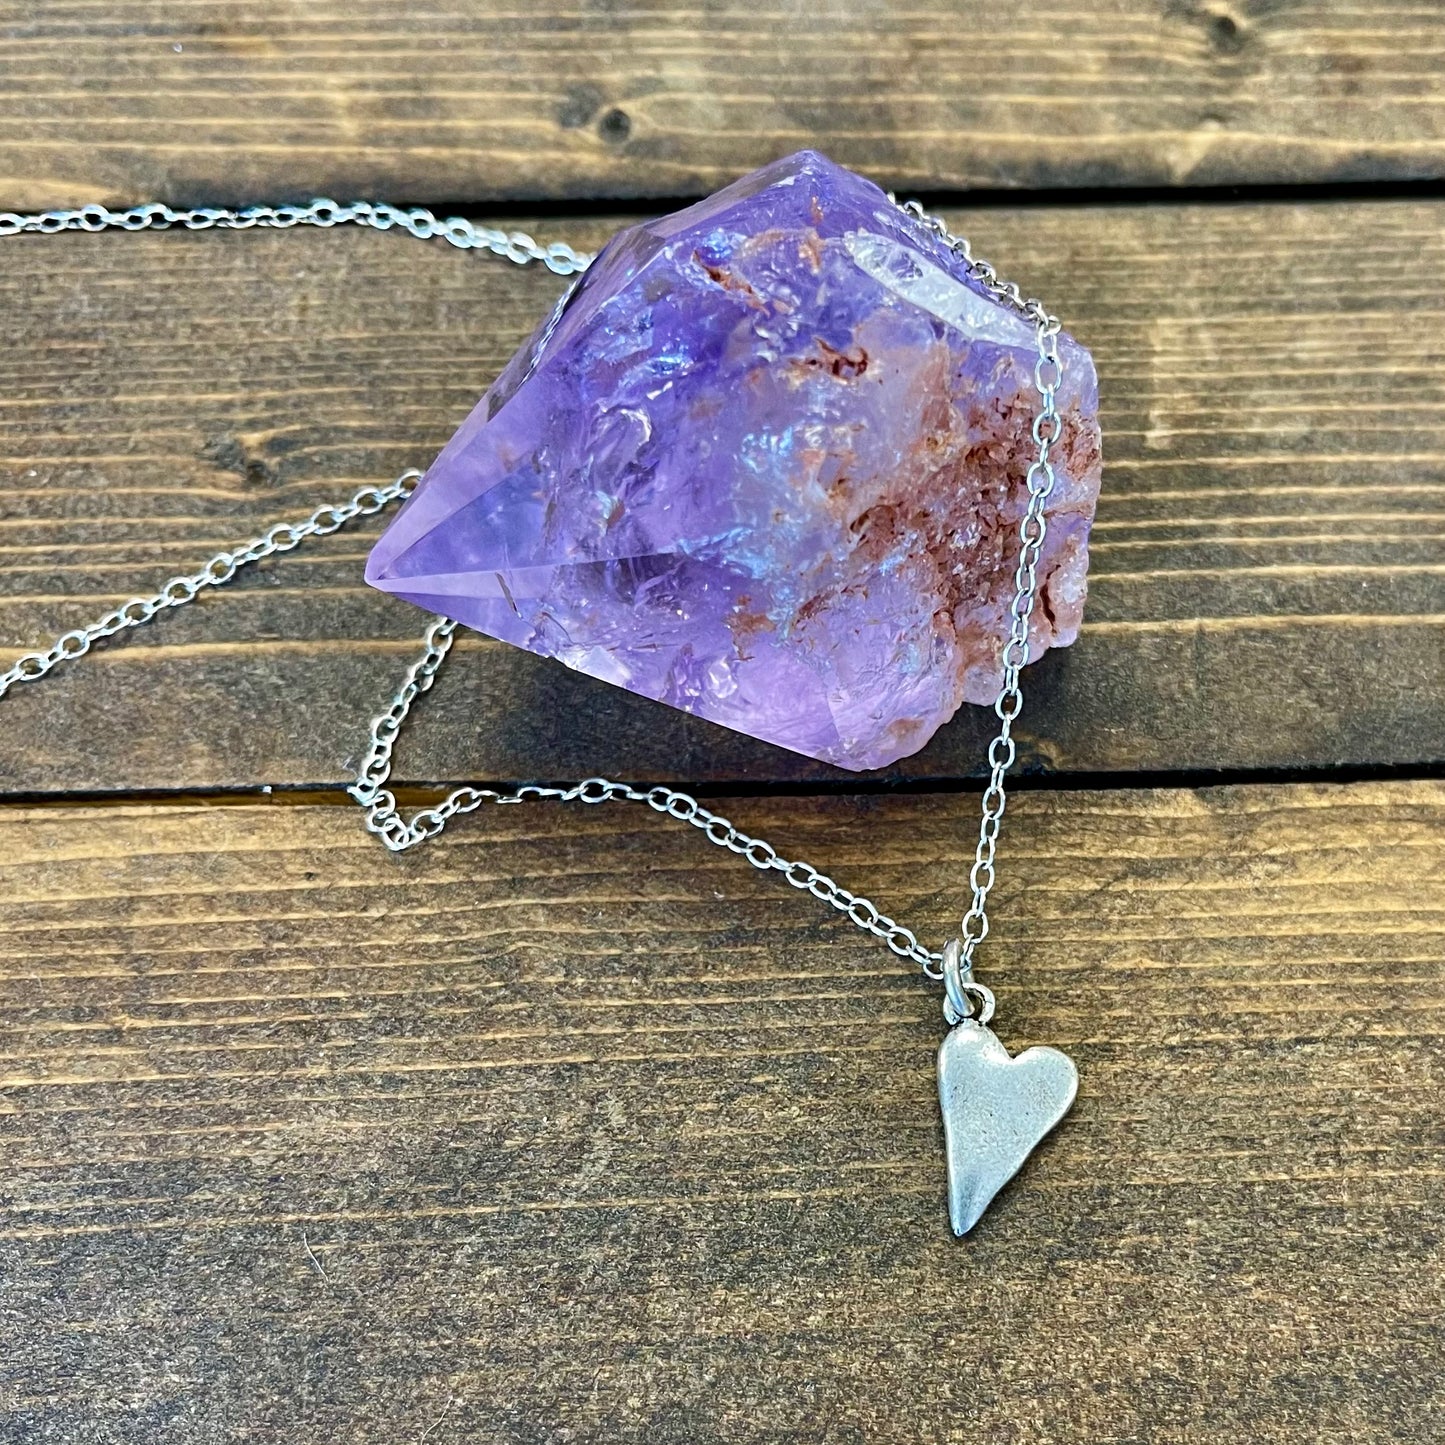 Primitive Heary Necklace - Love Is All You Need